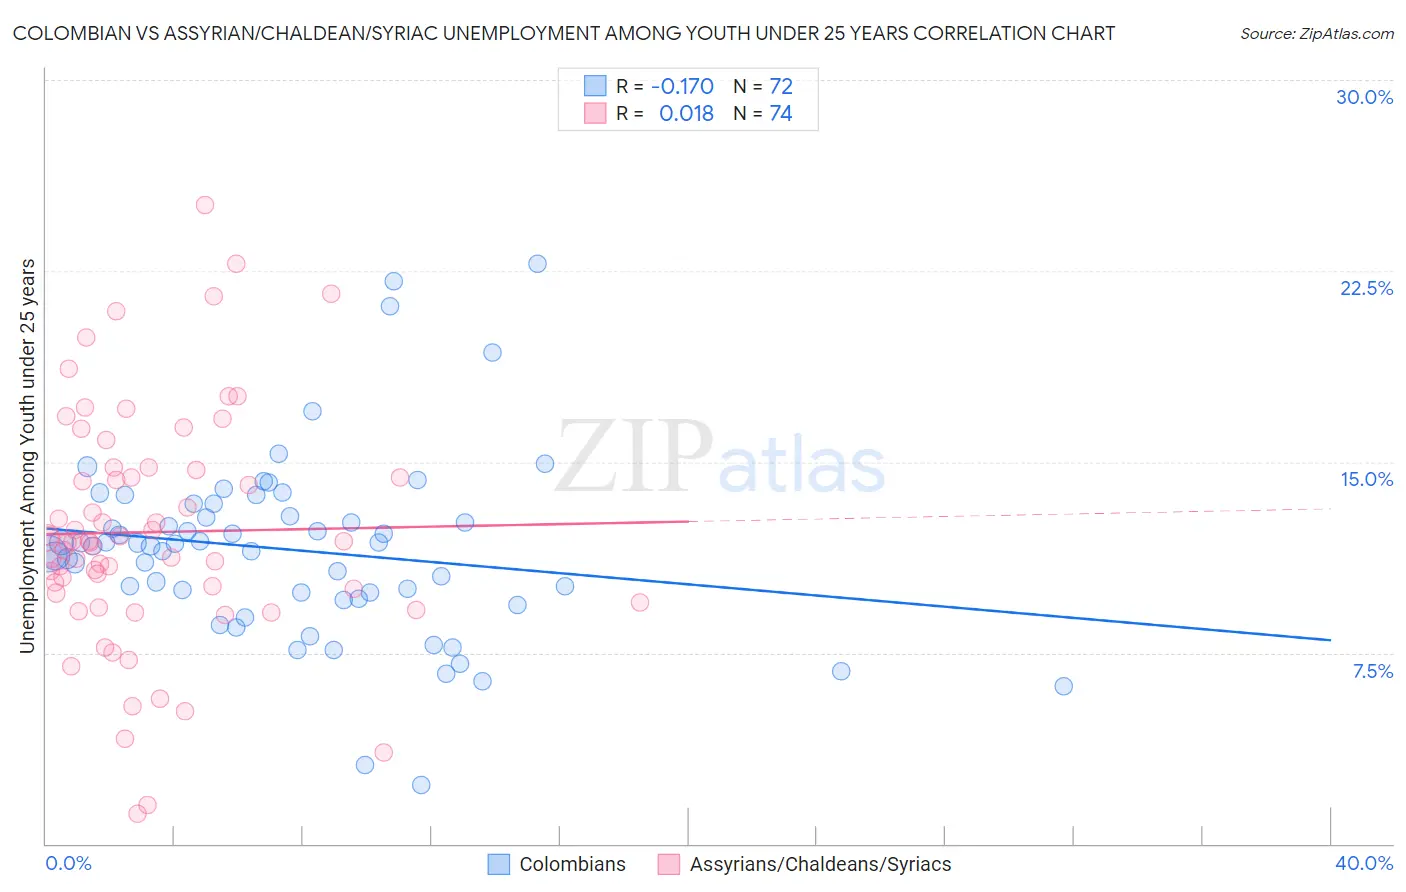 Colombian vs Assyrian/Chaldean/Syriac Unemployment Among Youth under 25 years